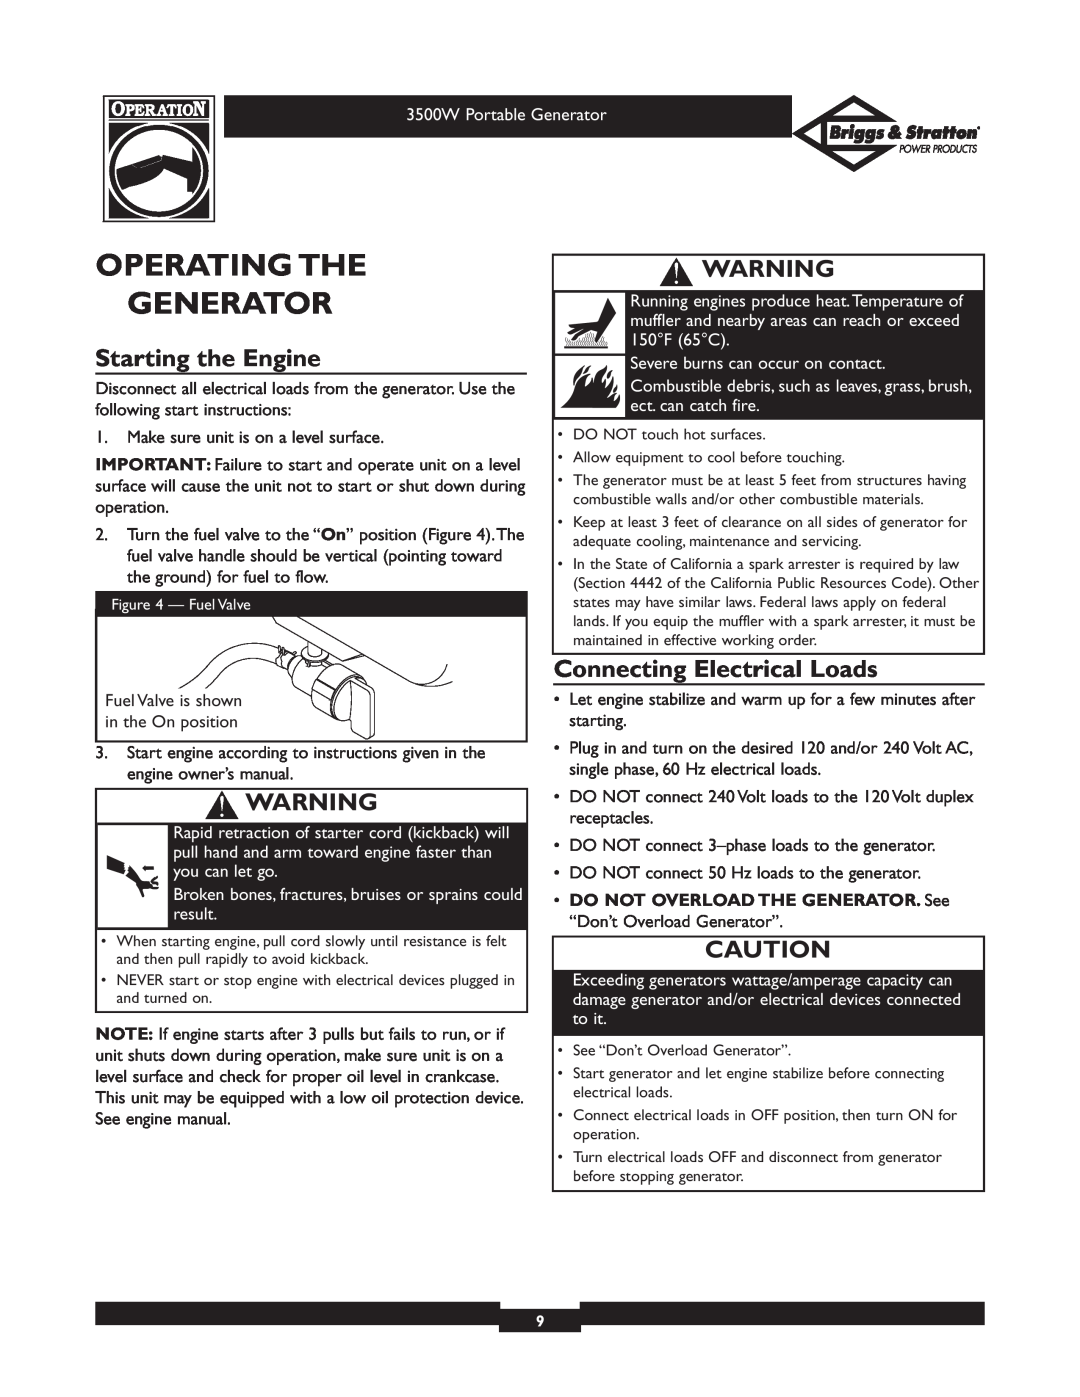 Briggs & Stratton 30208 owner manual Operating The Generator, Starting the Engine, Connecting Electrical Loads 